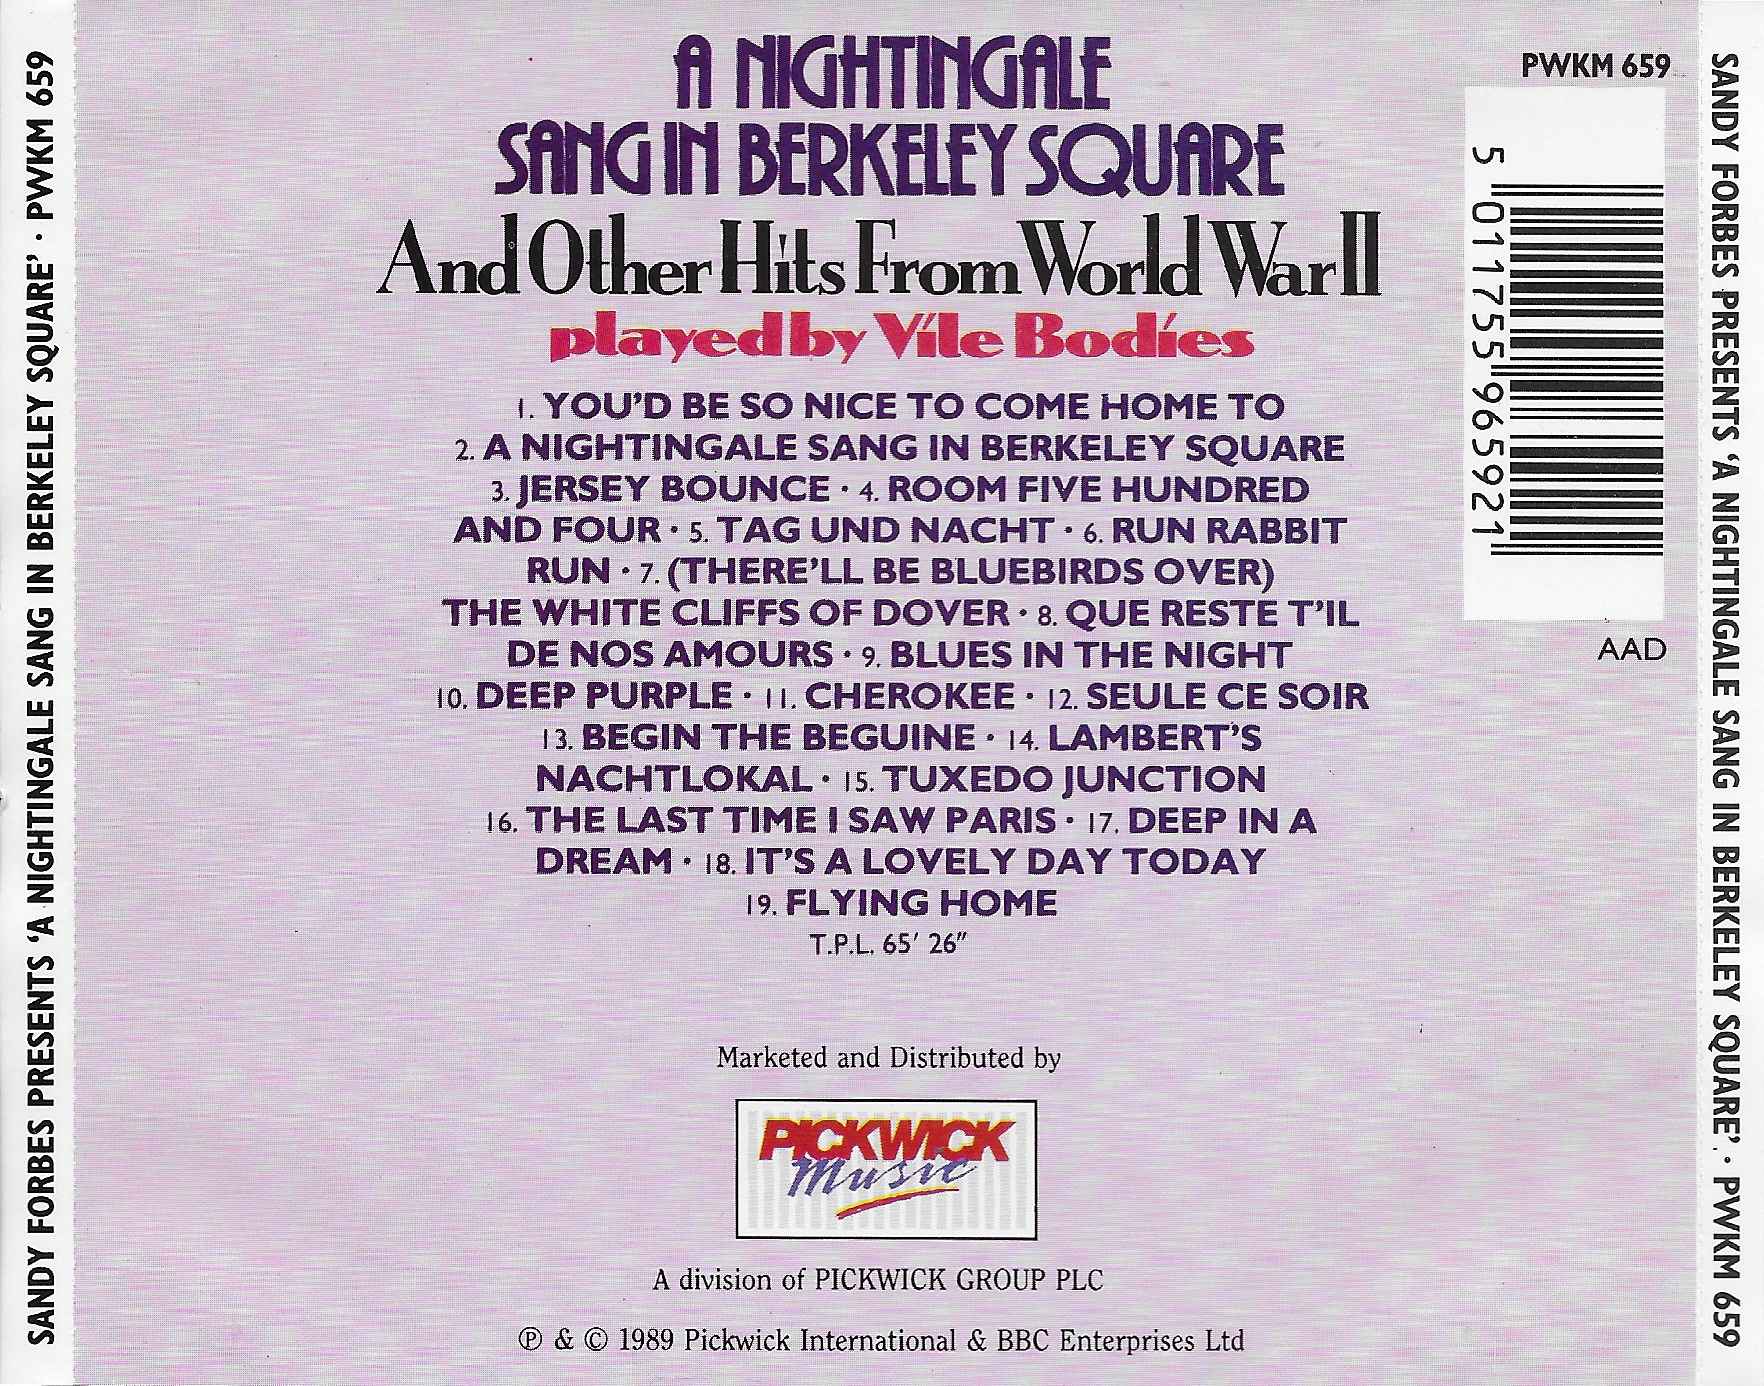 Picture of PWKS 659 Nightingale sang Berkeley Square and other hits from World War II by artist Vile Bodies from the BBC records and Tapes library